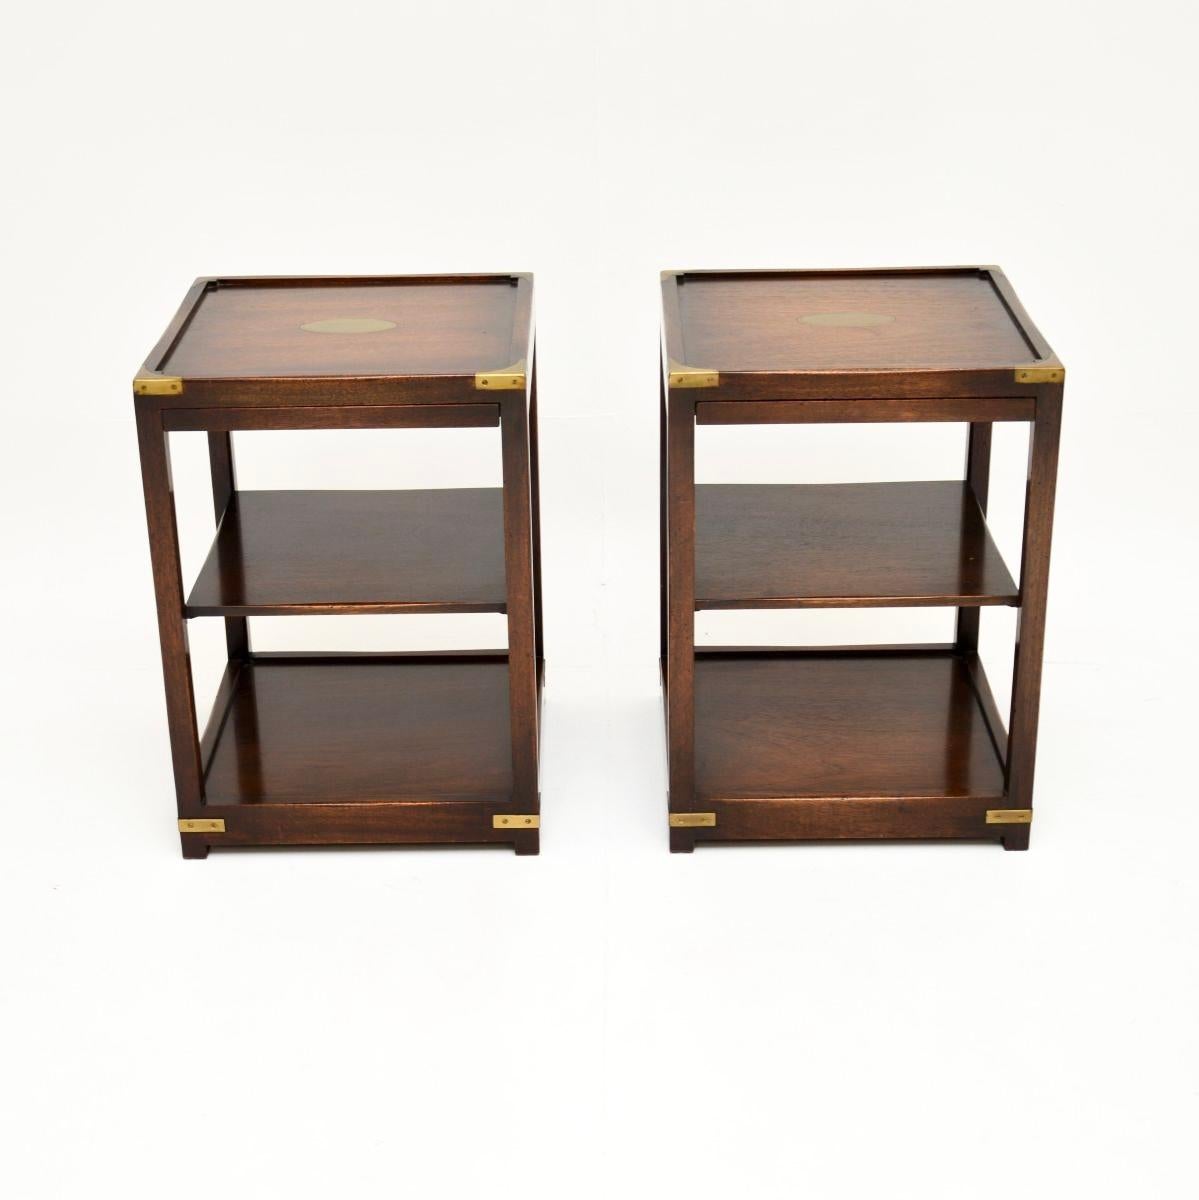 A smart and extremely well made pair of antique military campaign style side tables. They were made in England, and date from around the 1950’s.

The quality is outstanding, they have a very stylish and useful design, perfect for use as lamp tables